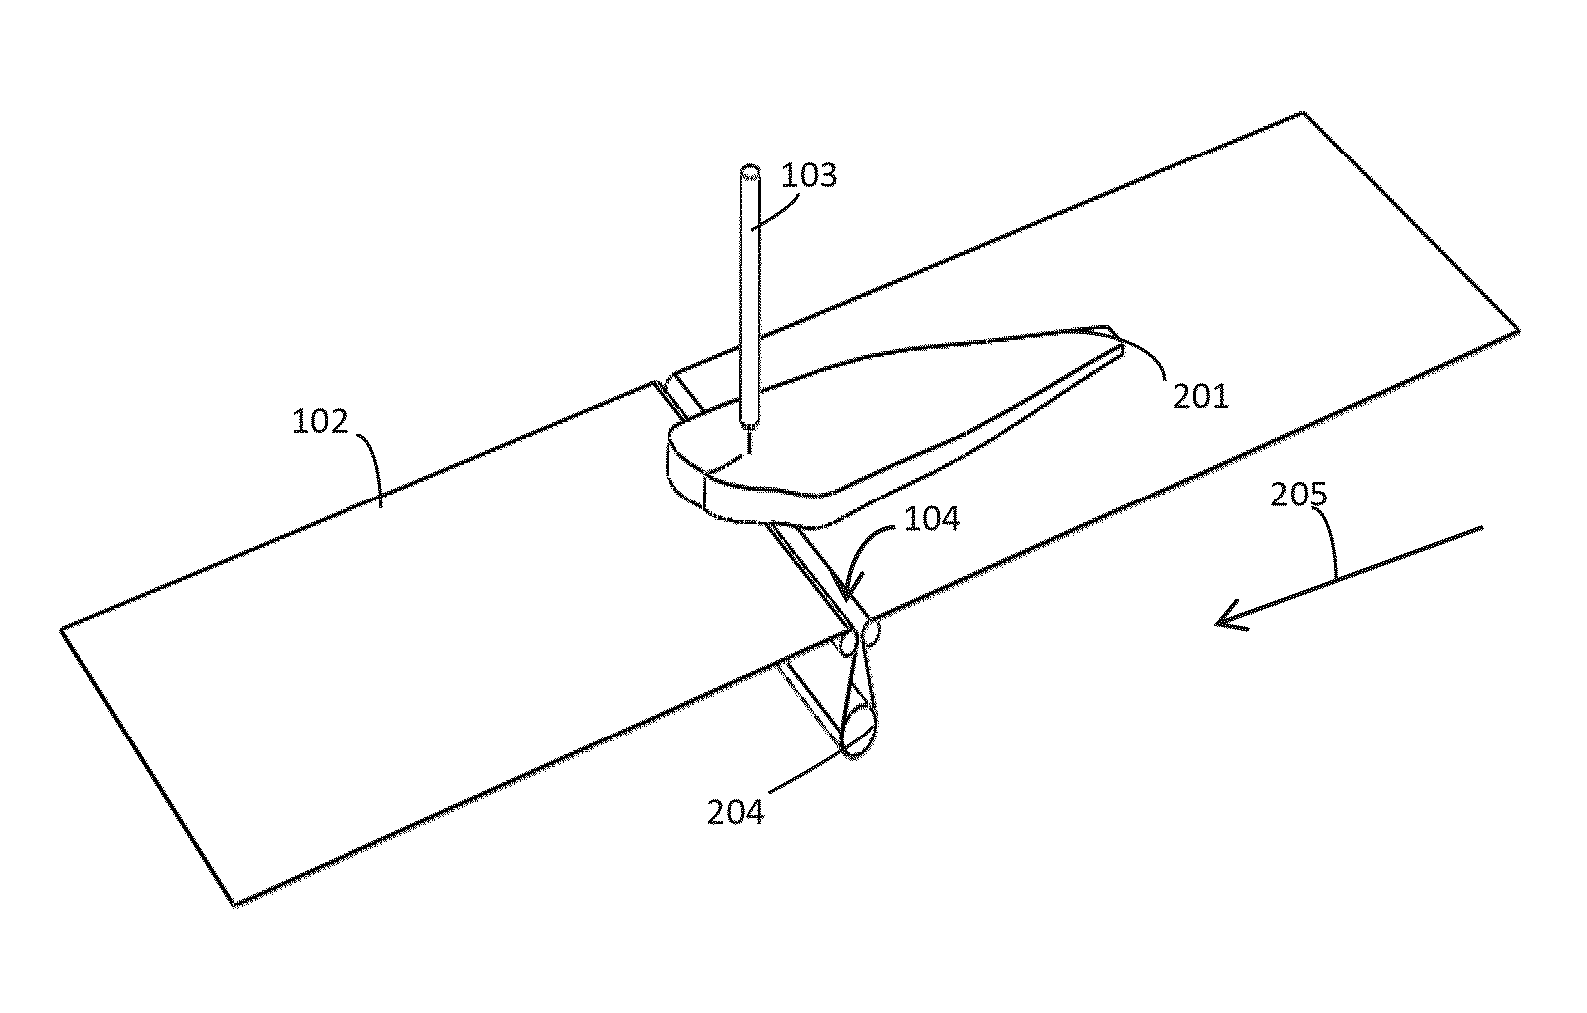 Cutting apparatus for cutting food items conveyed on a conveyor including at least one conveyor belt